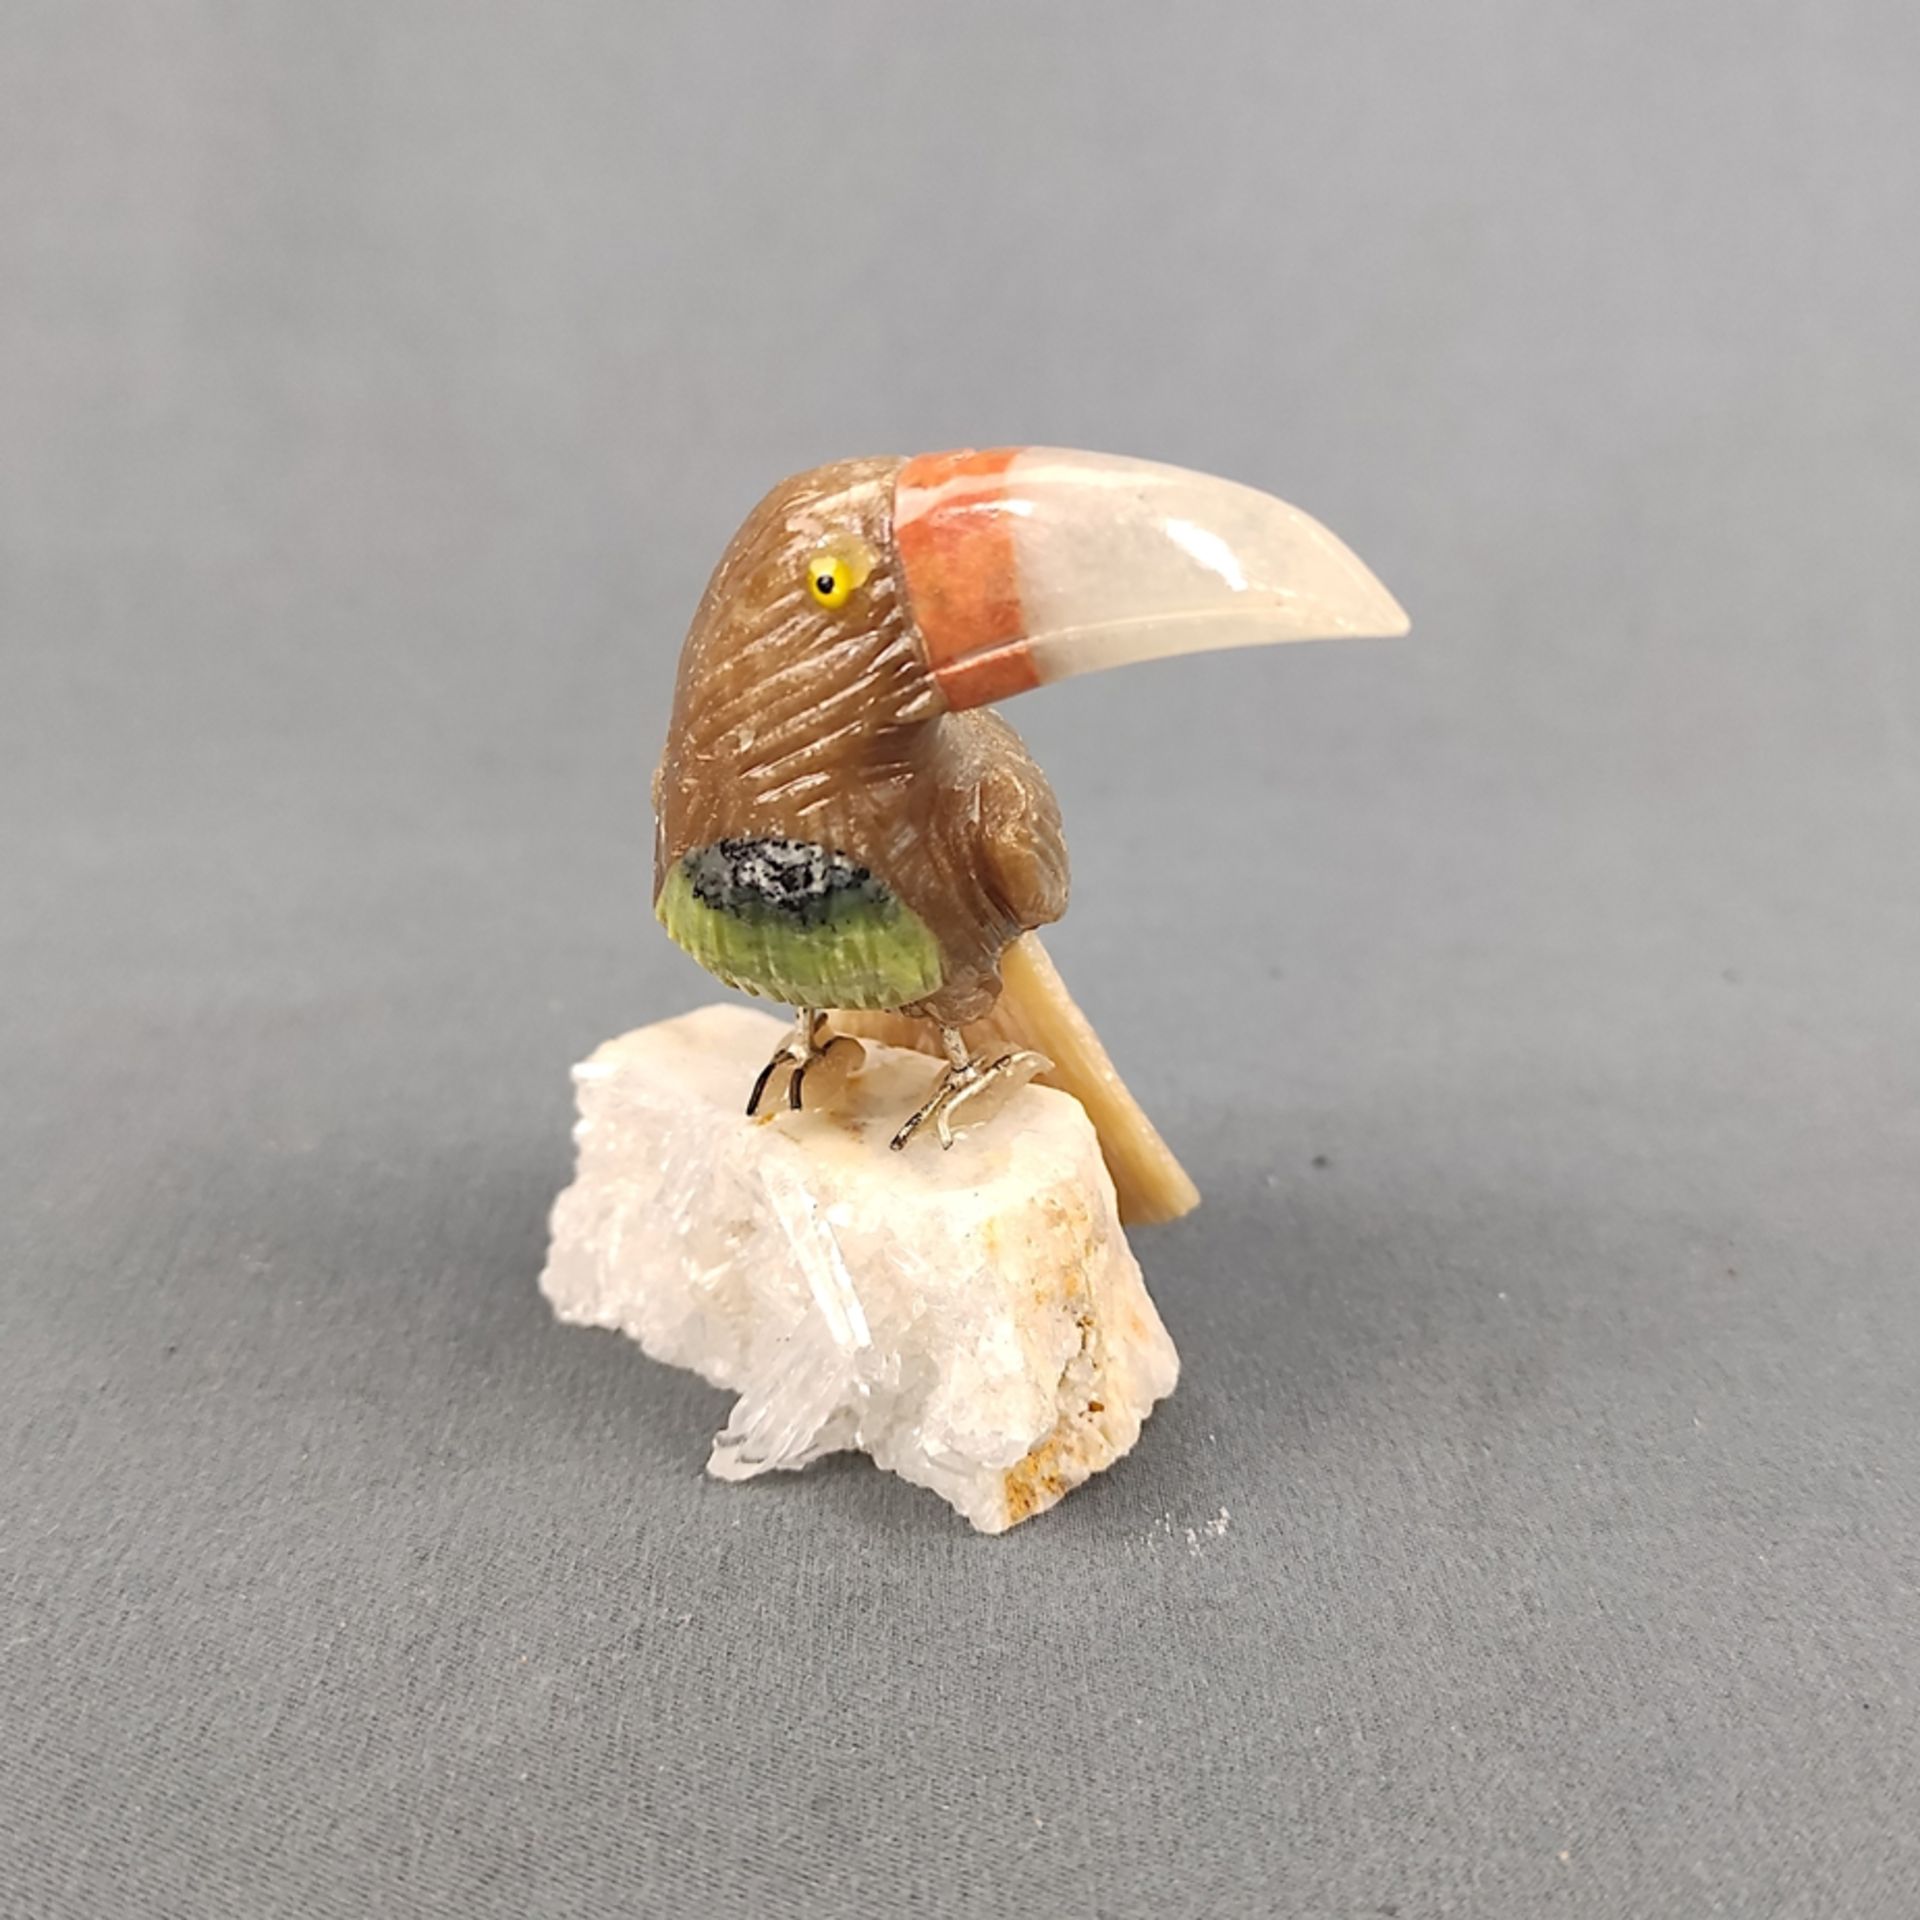 3 birds made of semi-precious stones, consisting of "toucan" sitting on rock crystal, height 6.5cm, - Image 6 of 7